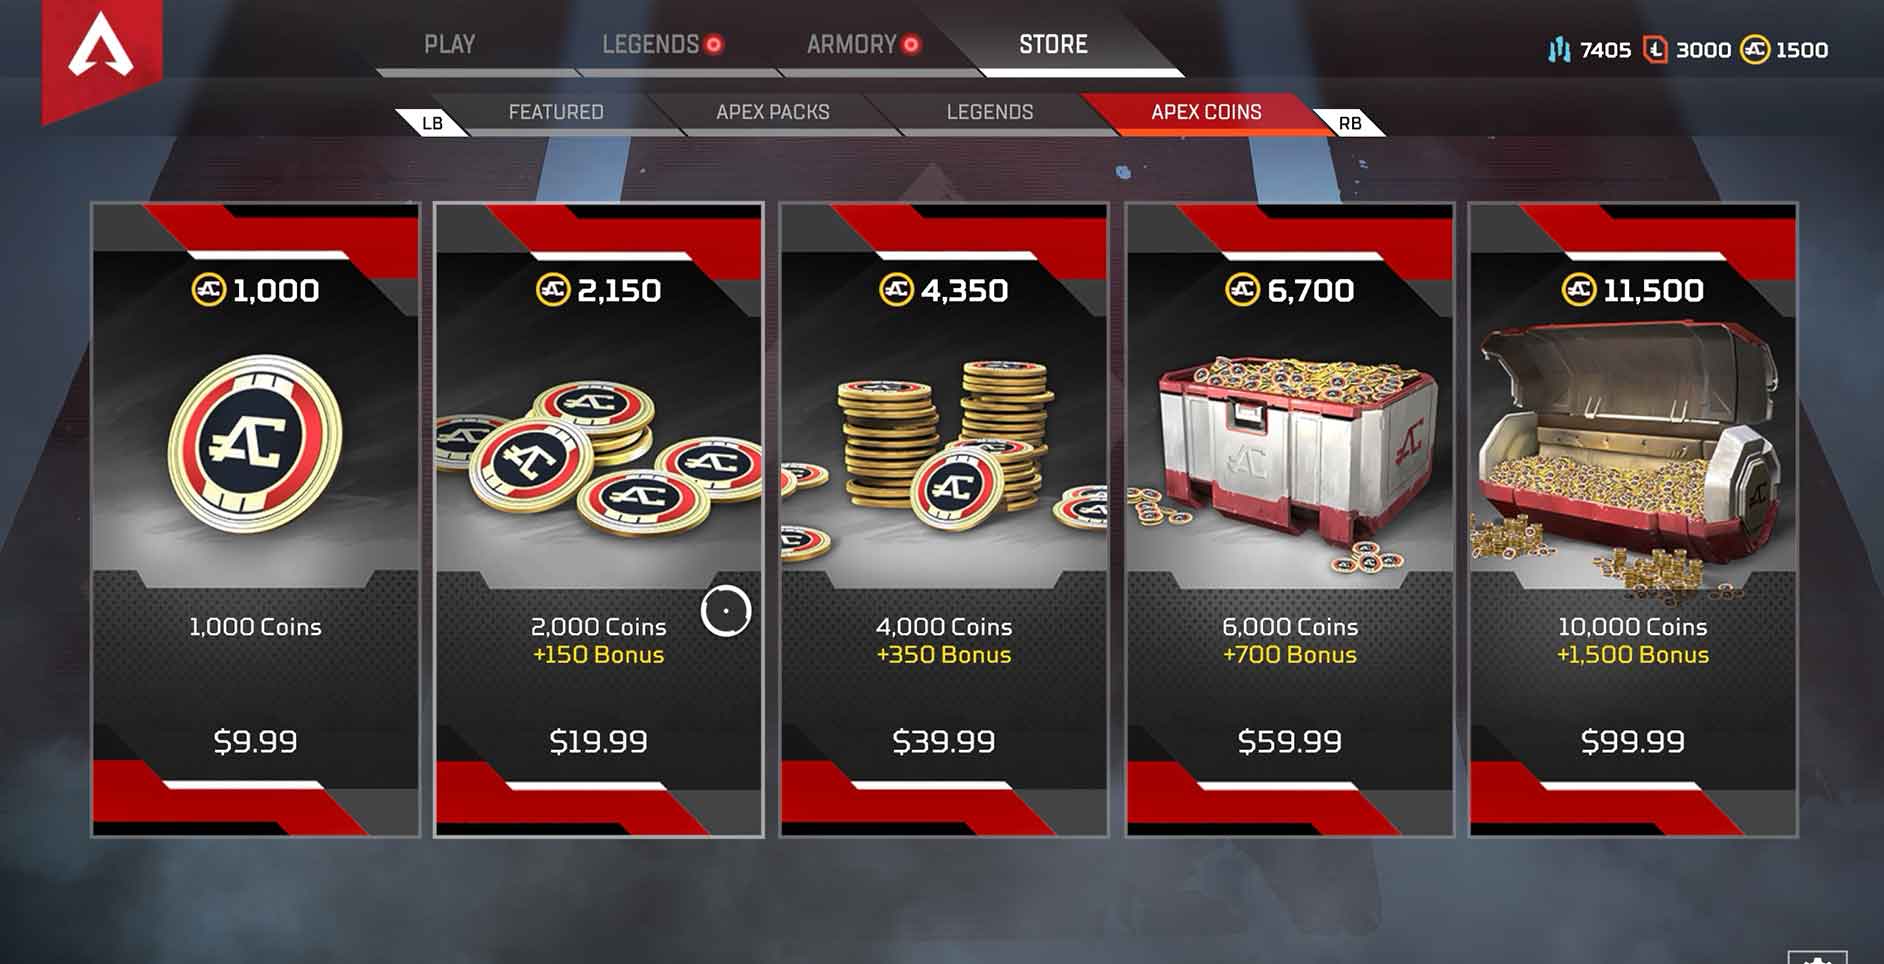 It S Going To Cost You If You Want To Unlock Everything In Apex Legends